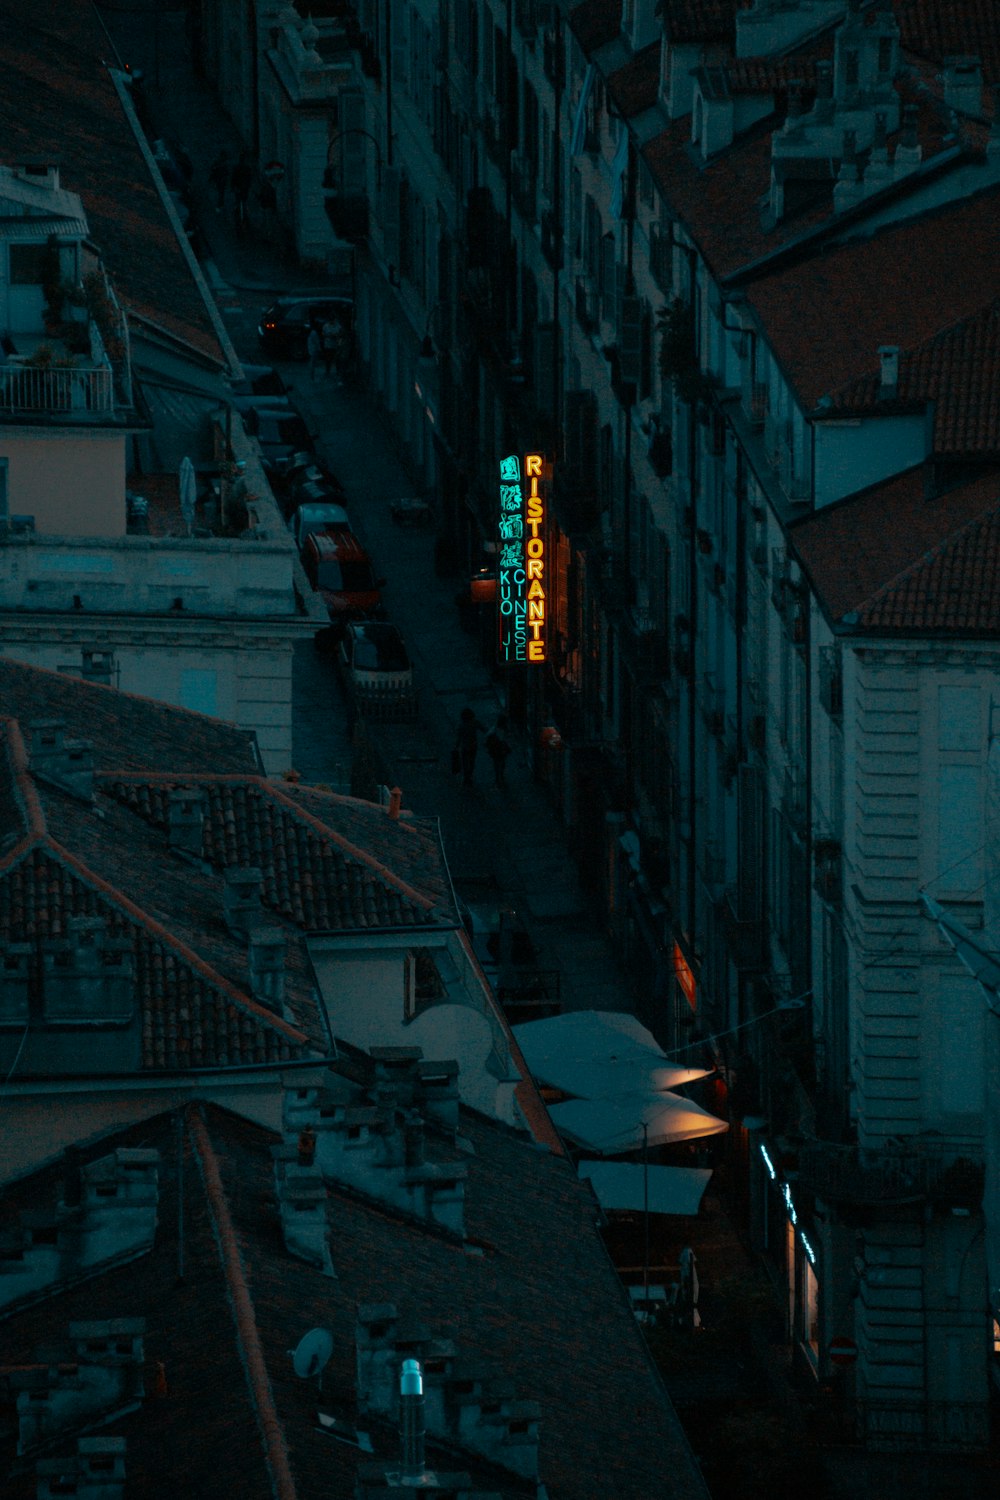 a city street at night with a neon sign on the building